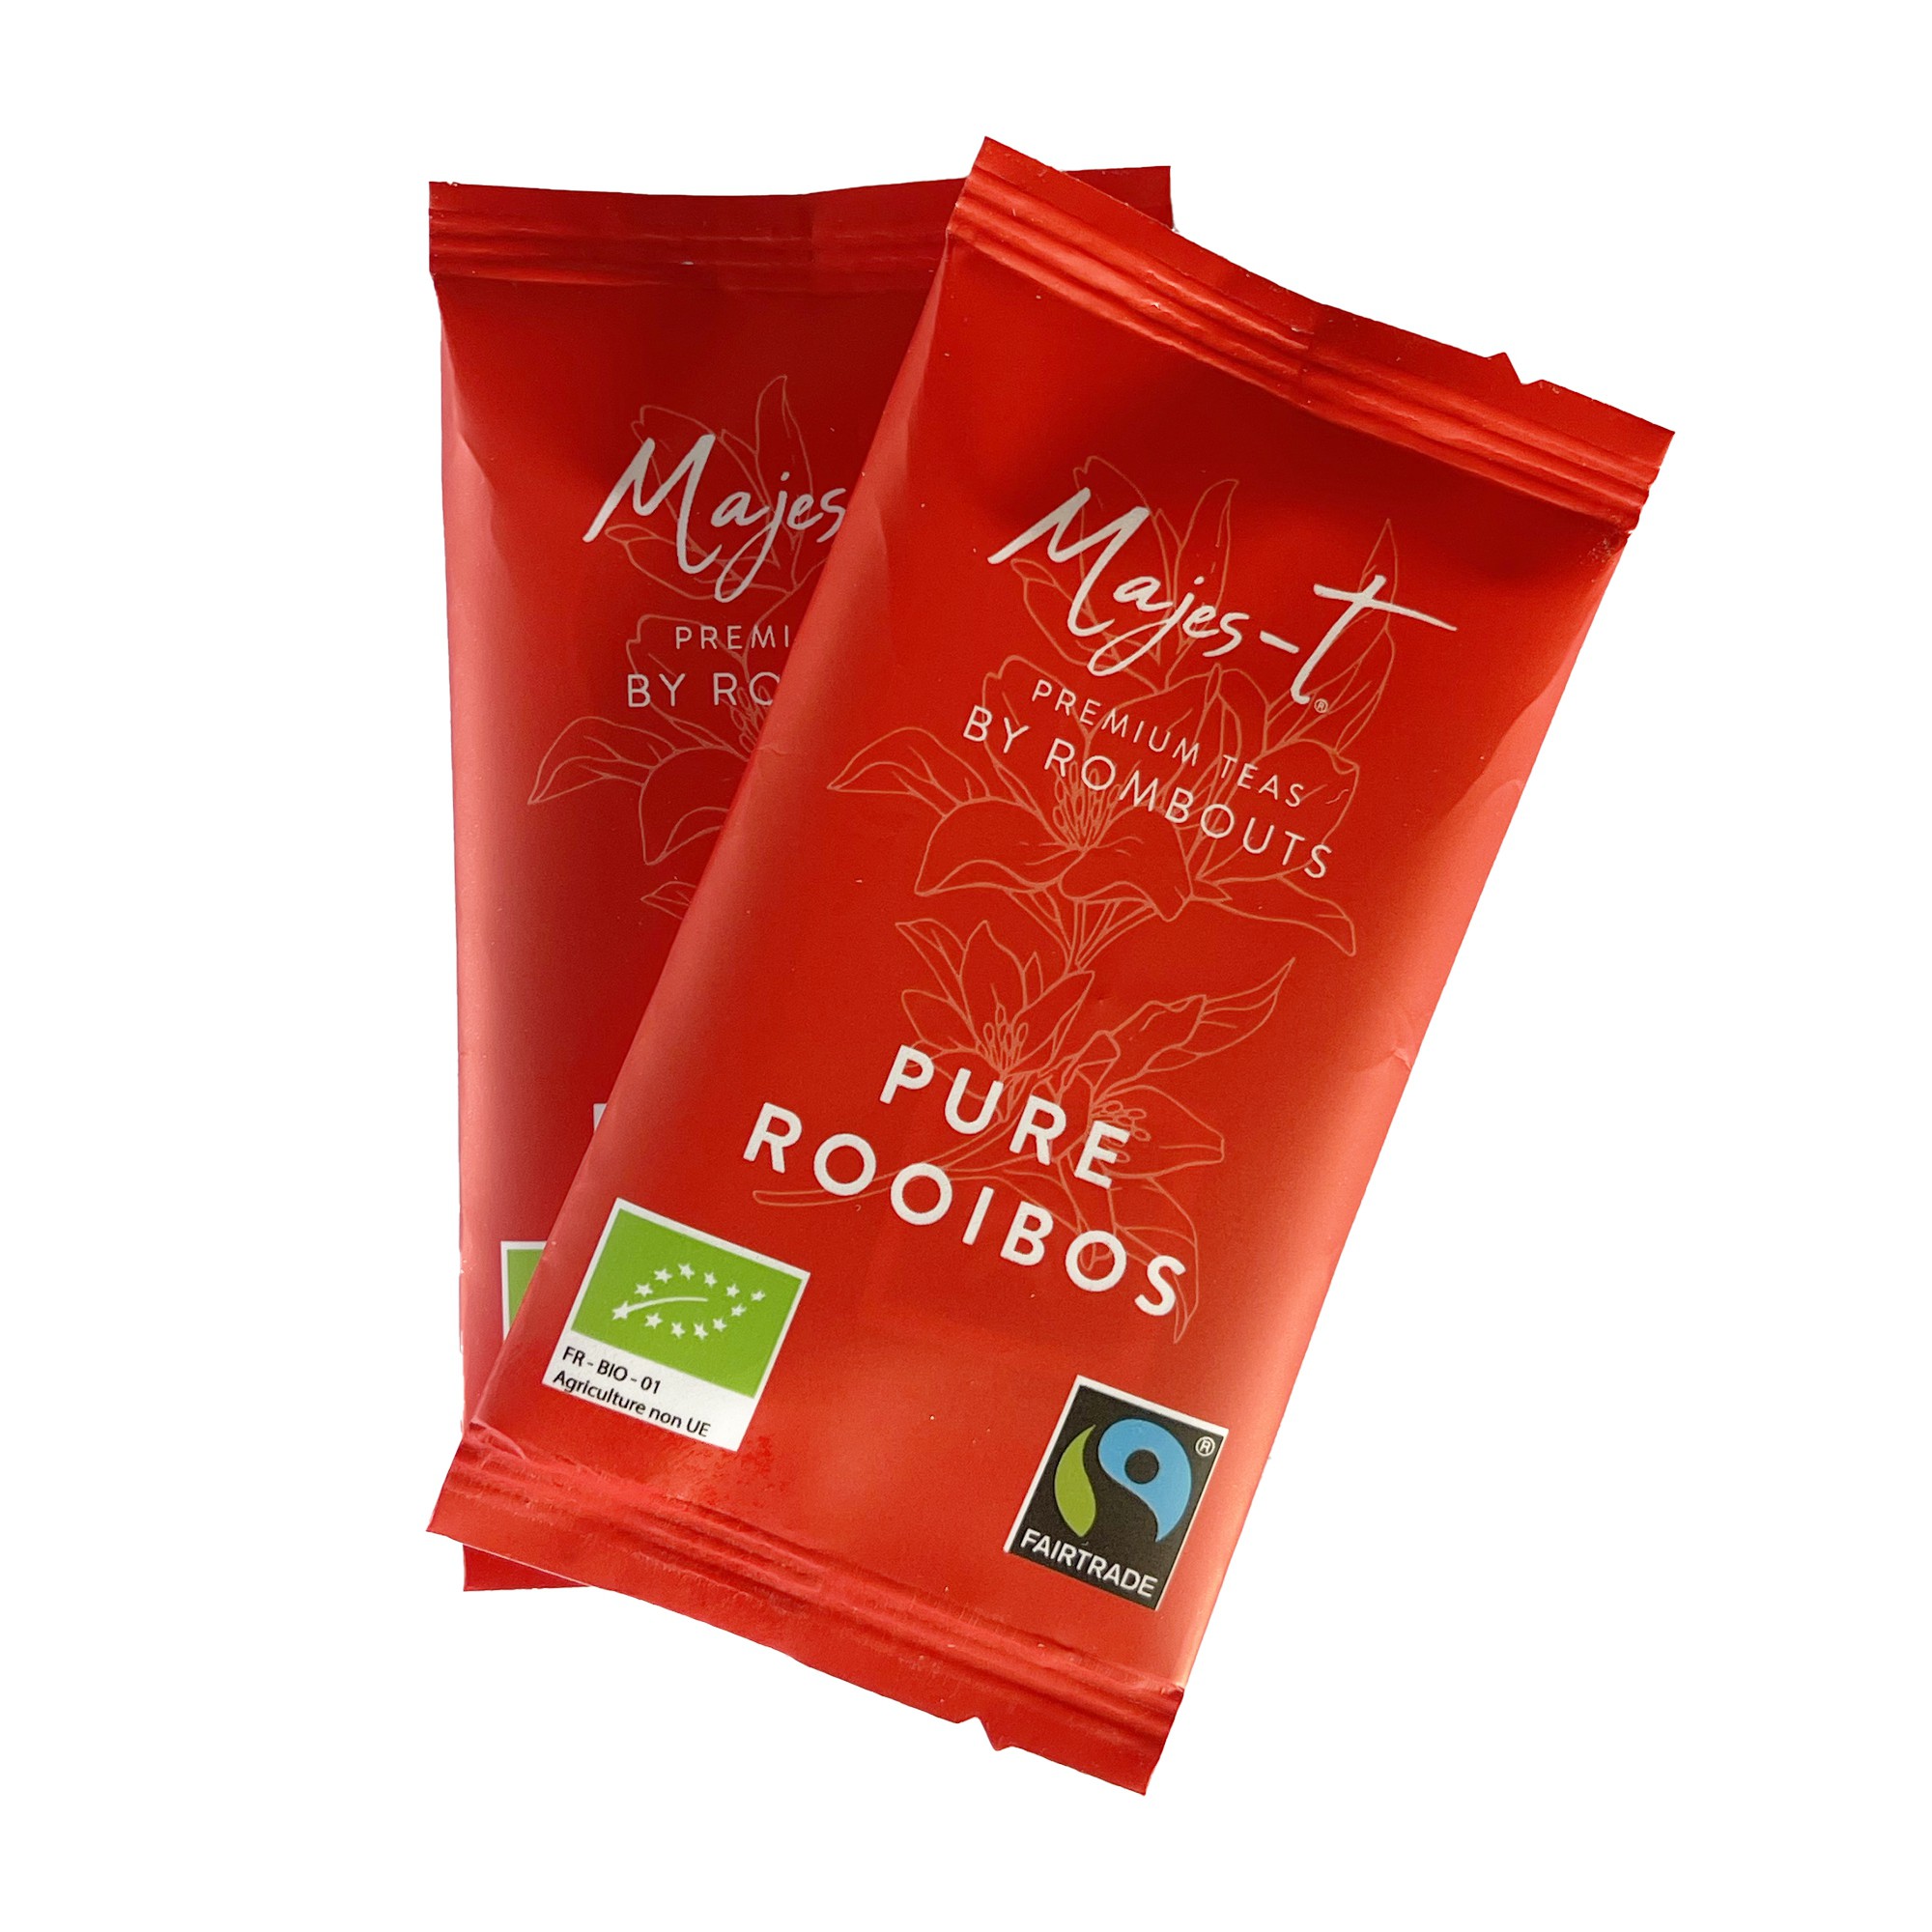 Majes-T Pure Rooibos